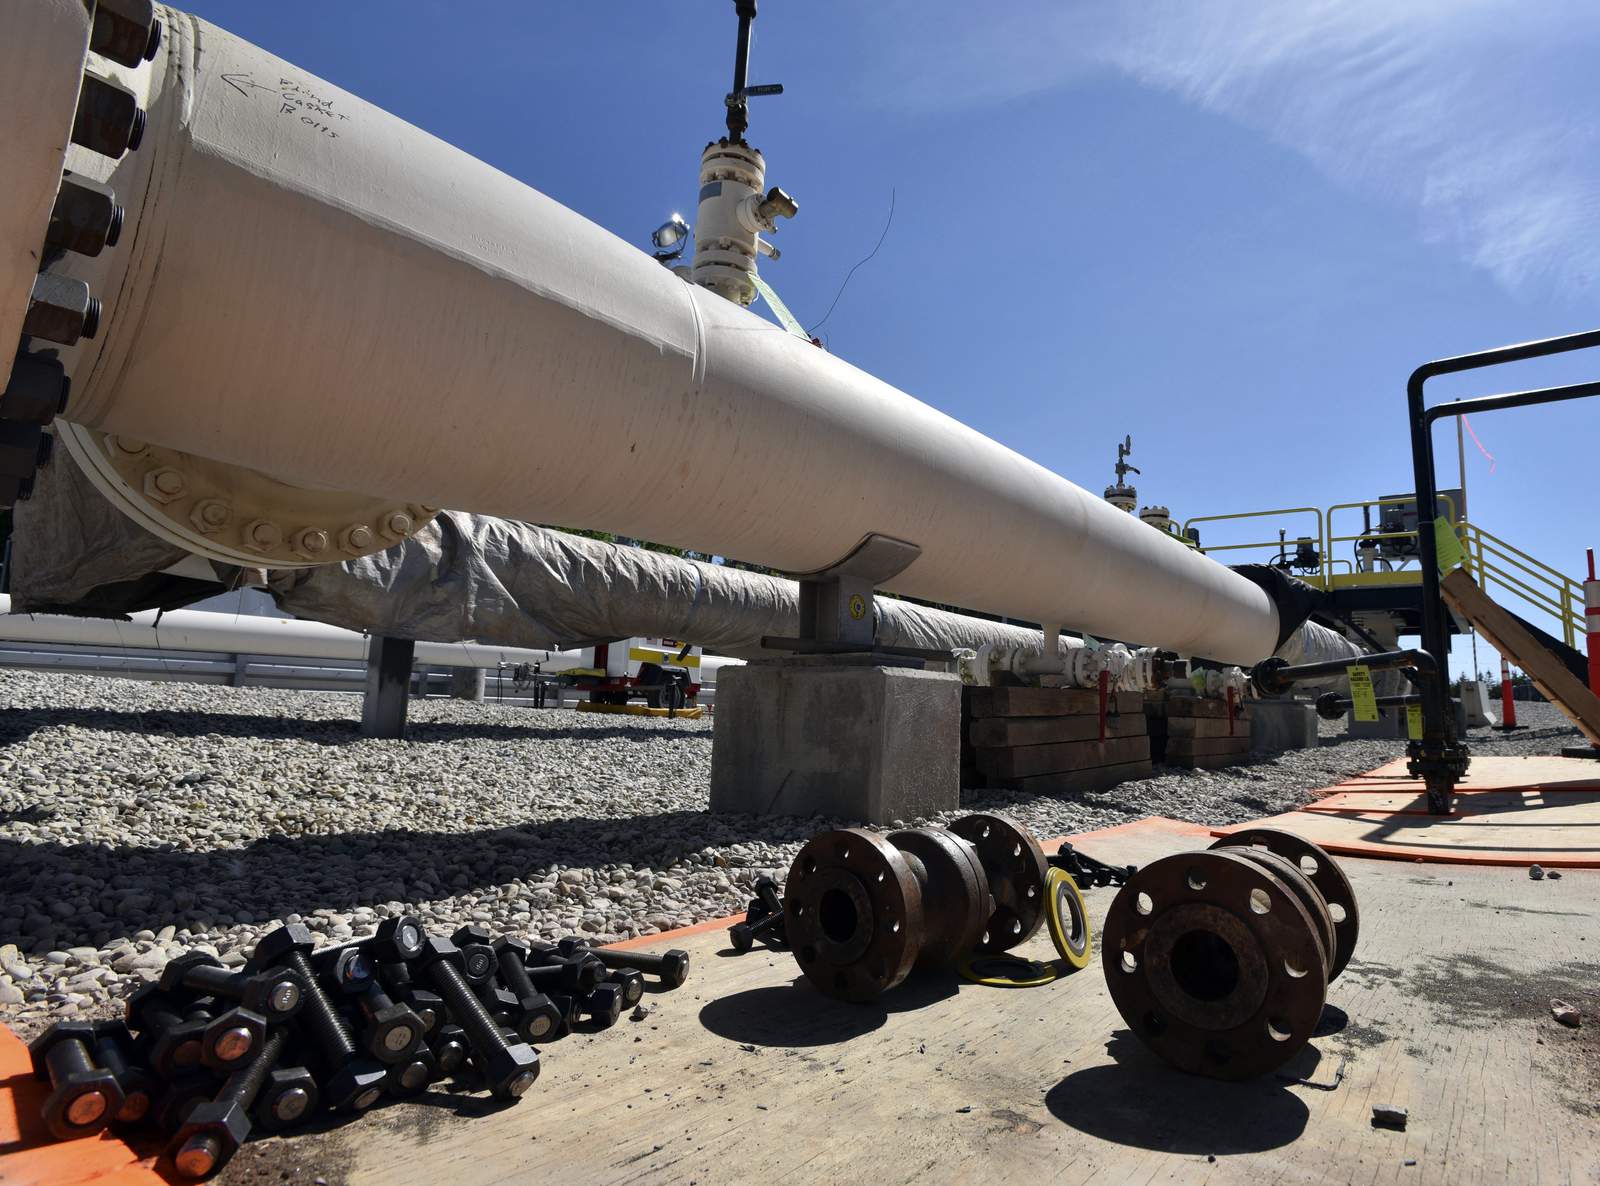 Regulators deny quick approval of new Great Lakes pipeline